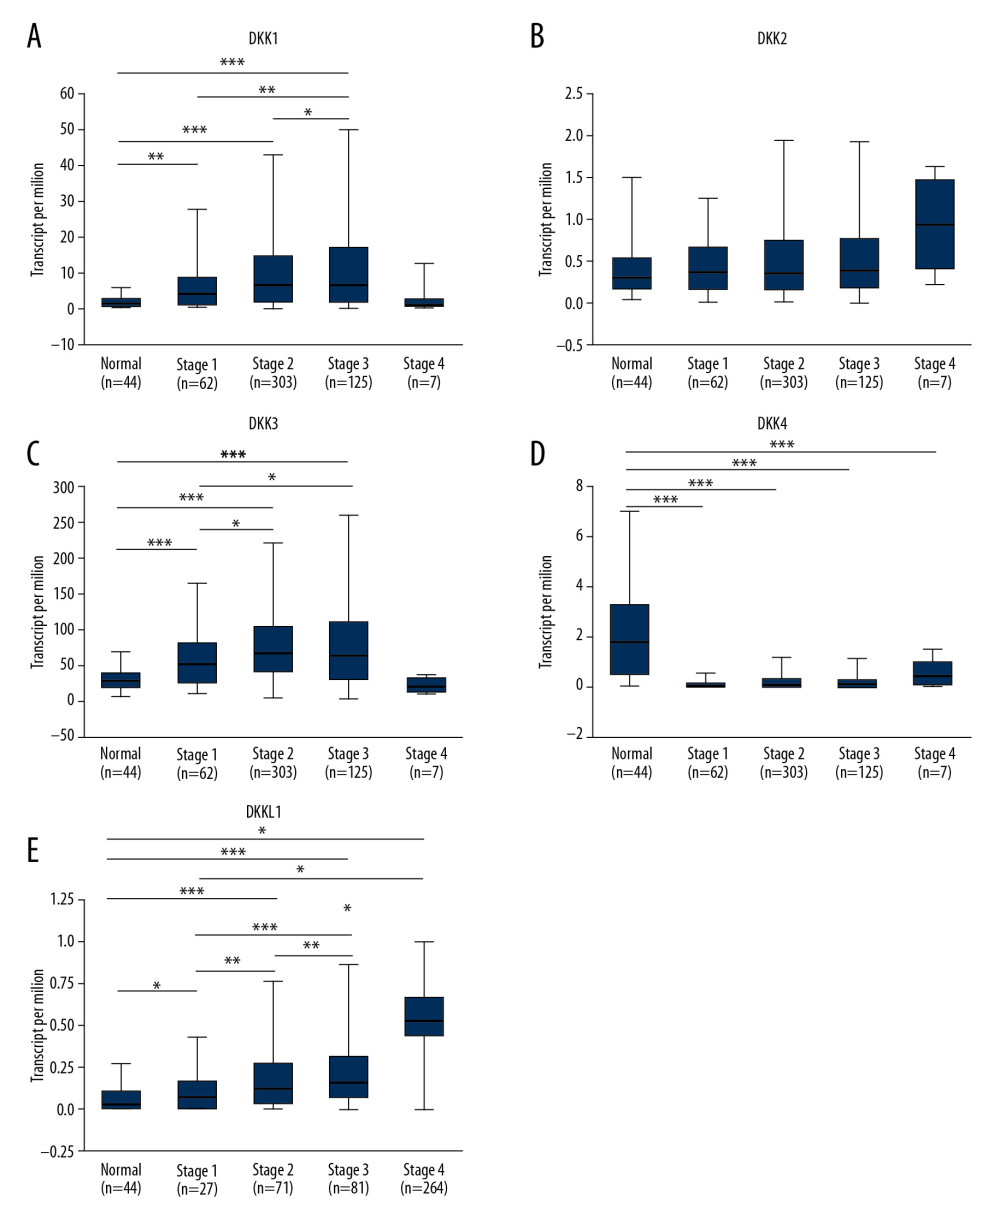 (A–E) Association of the mRNA expression of distinct DKKs and tumor grades of HNSCC patients. * P<0.05, ** P<0.01, *** P<0.001. DKK – Dickkopf Wnt signaling pathway inhibitor; HNSCC – head and neck squamous cell carcinoma.